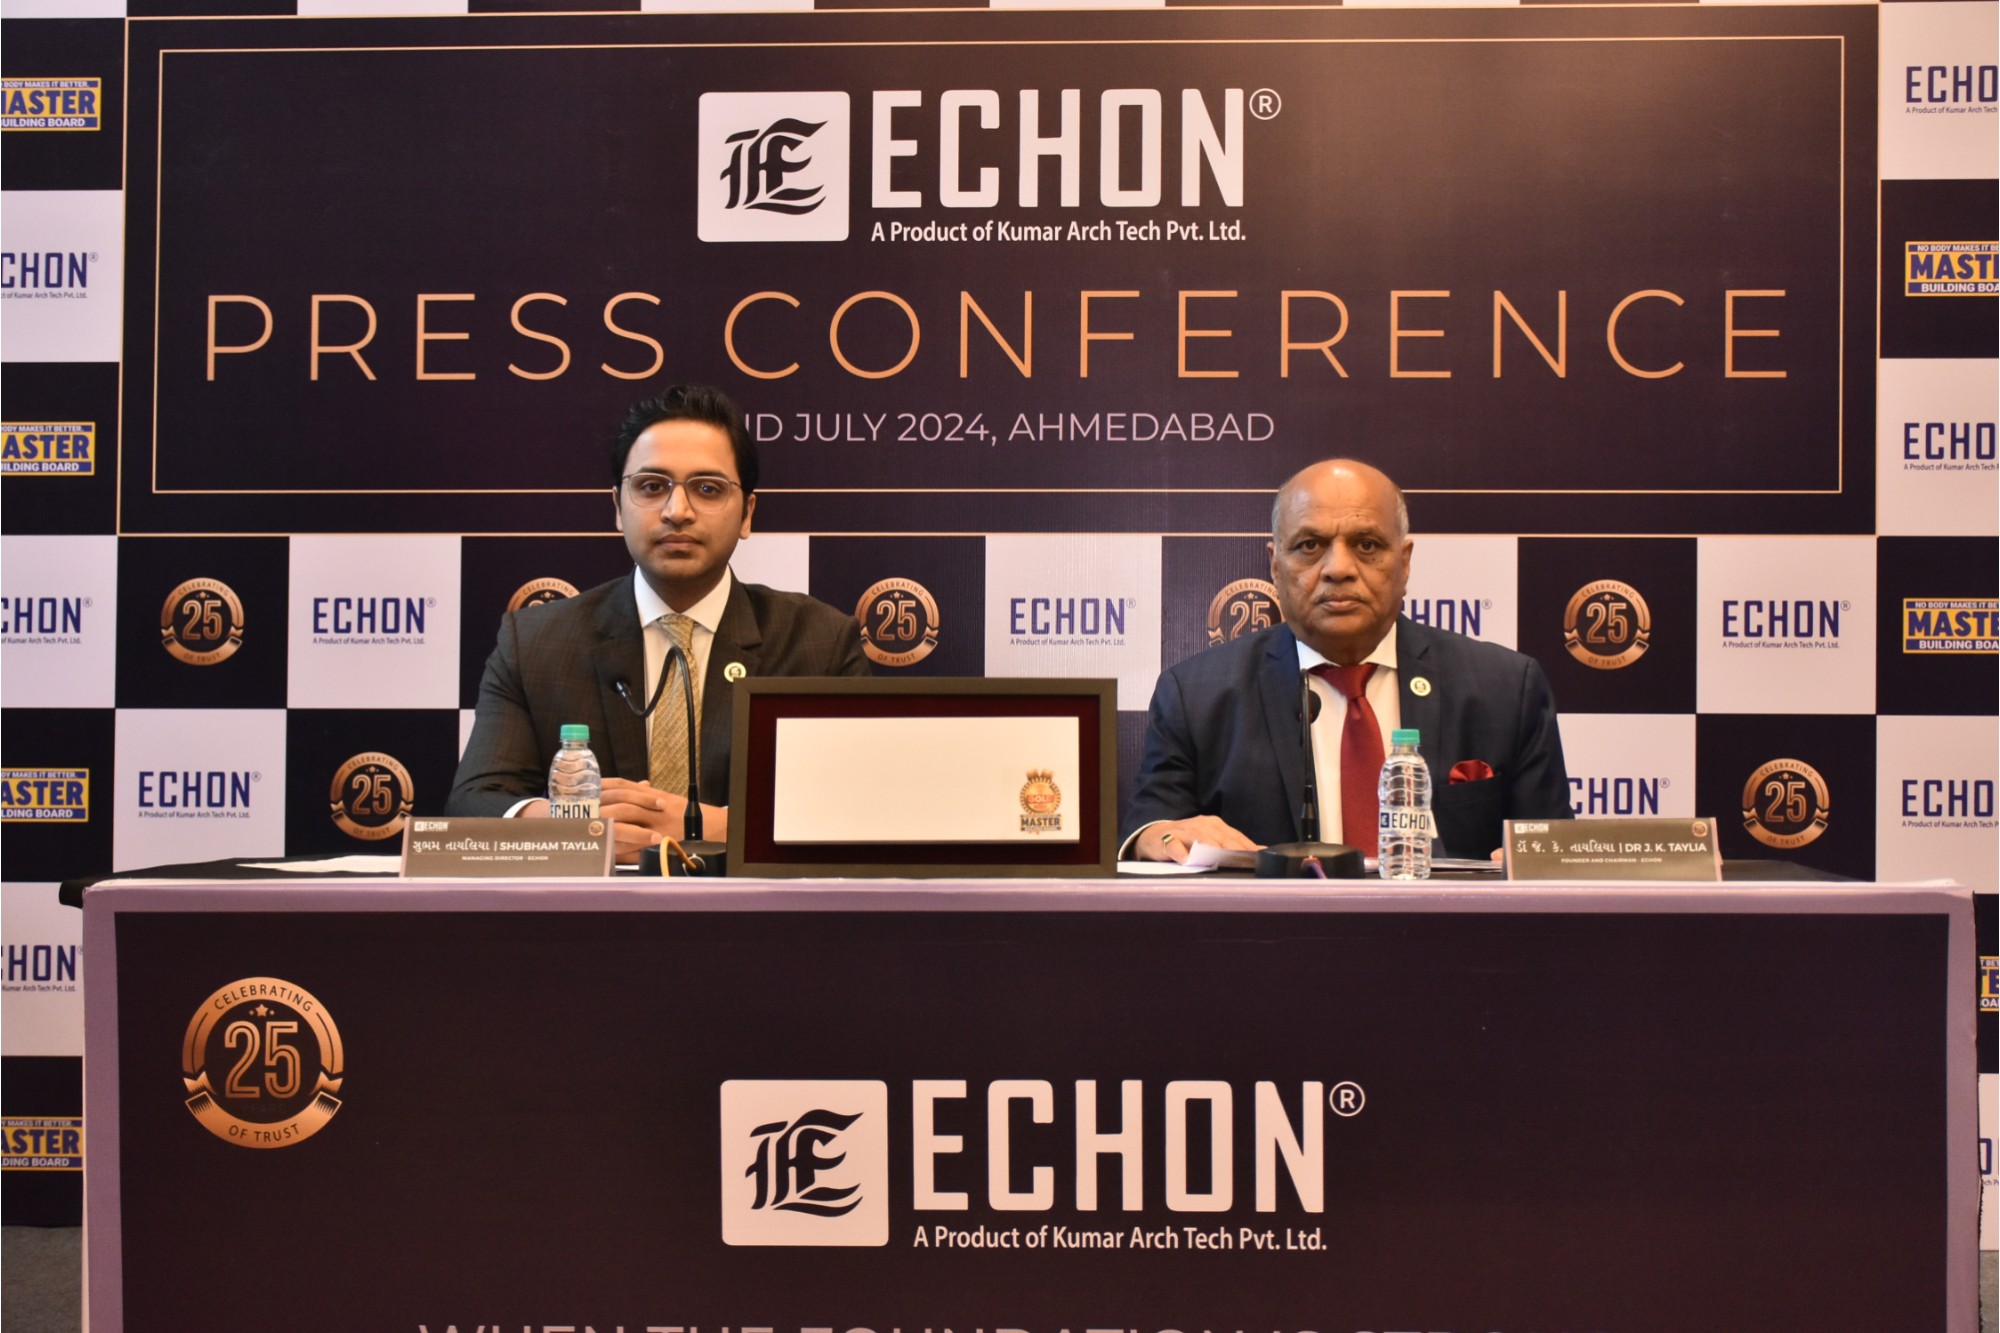 Echon brings innovative building solutions to India